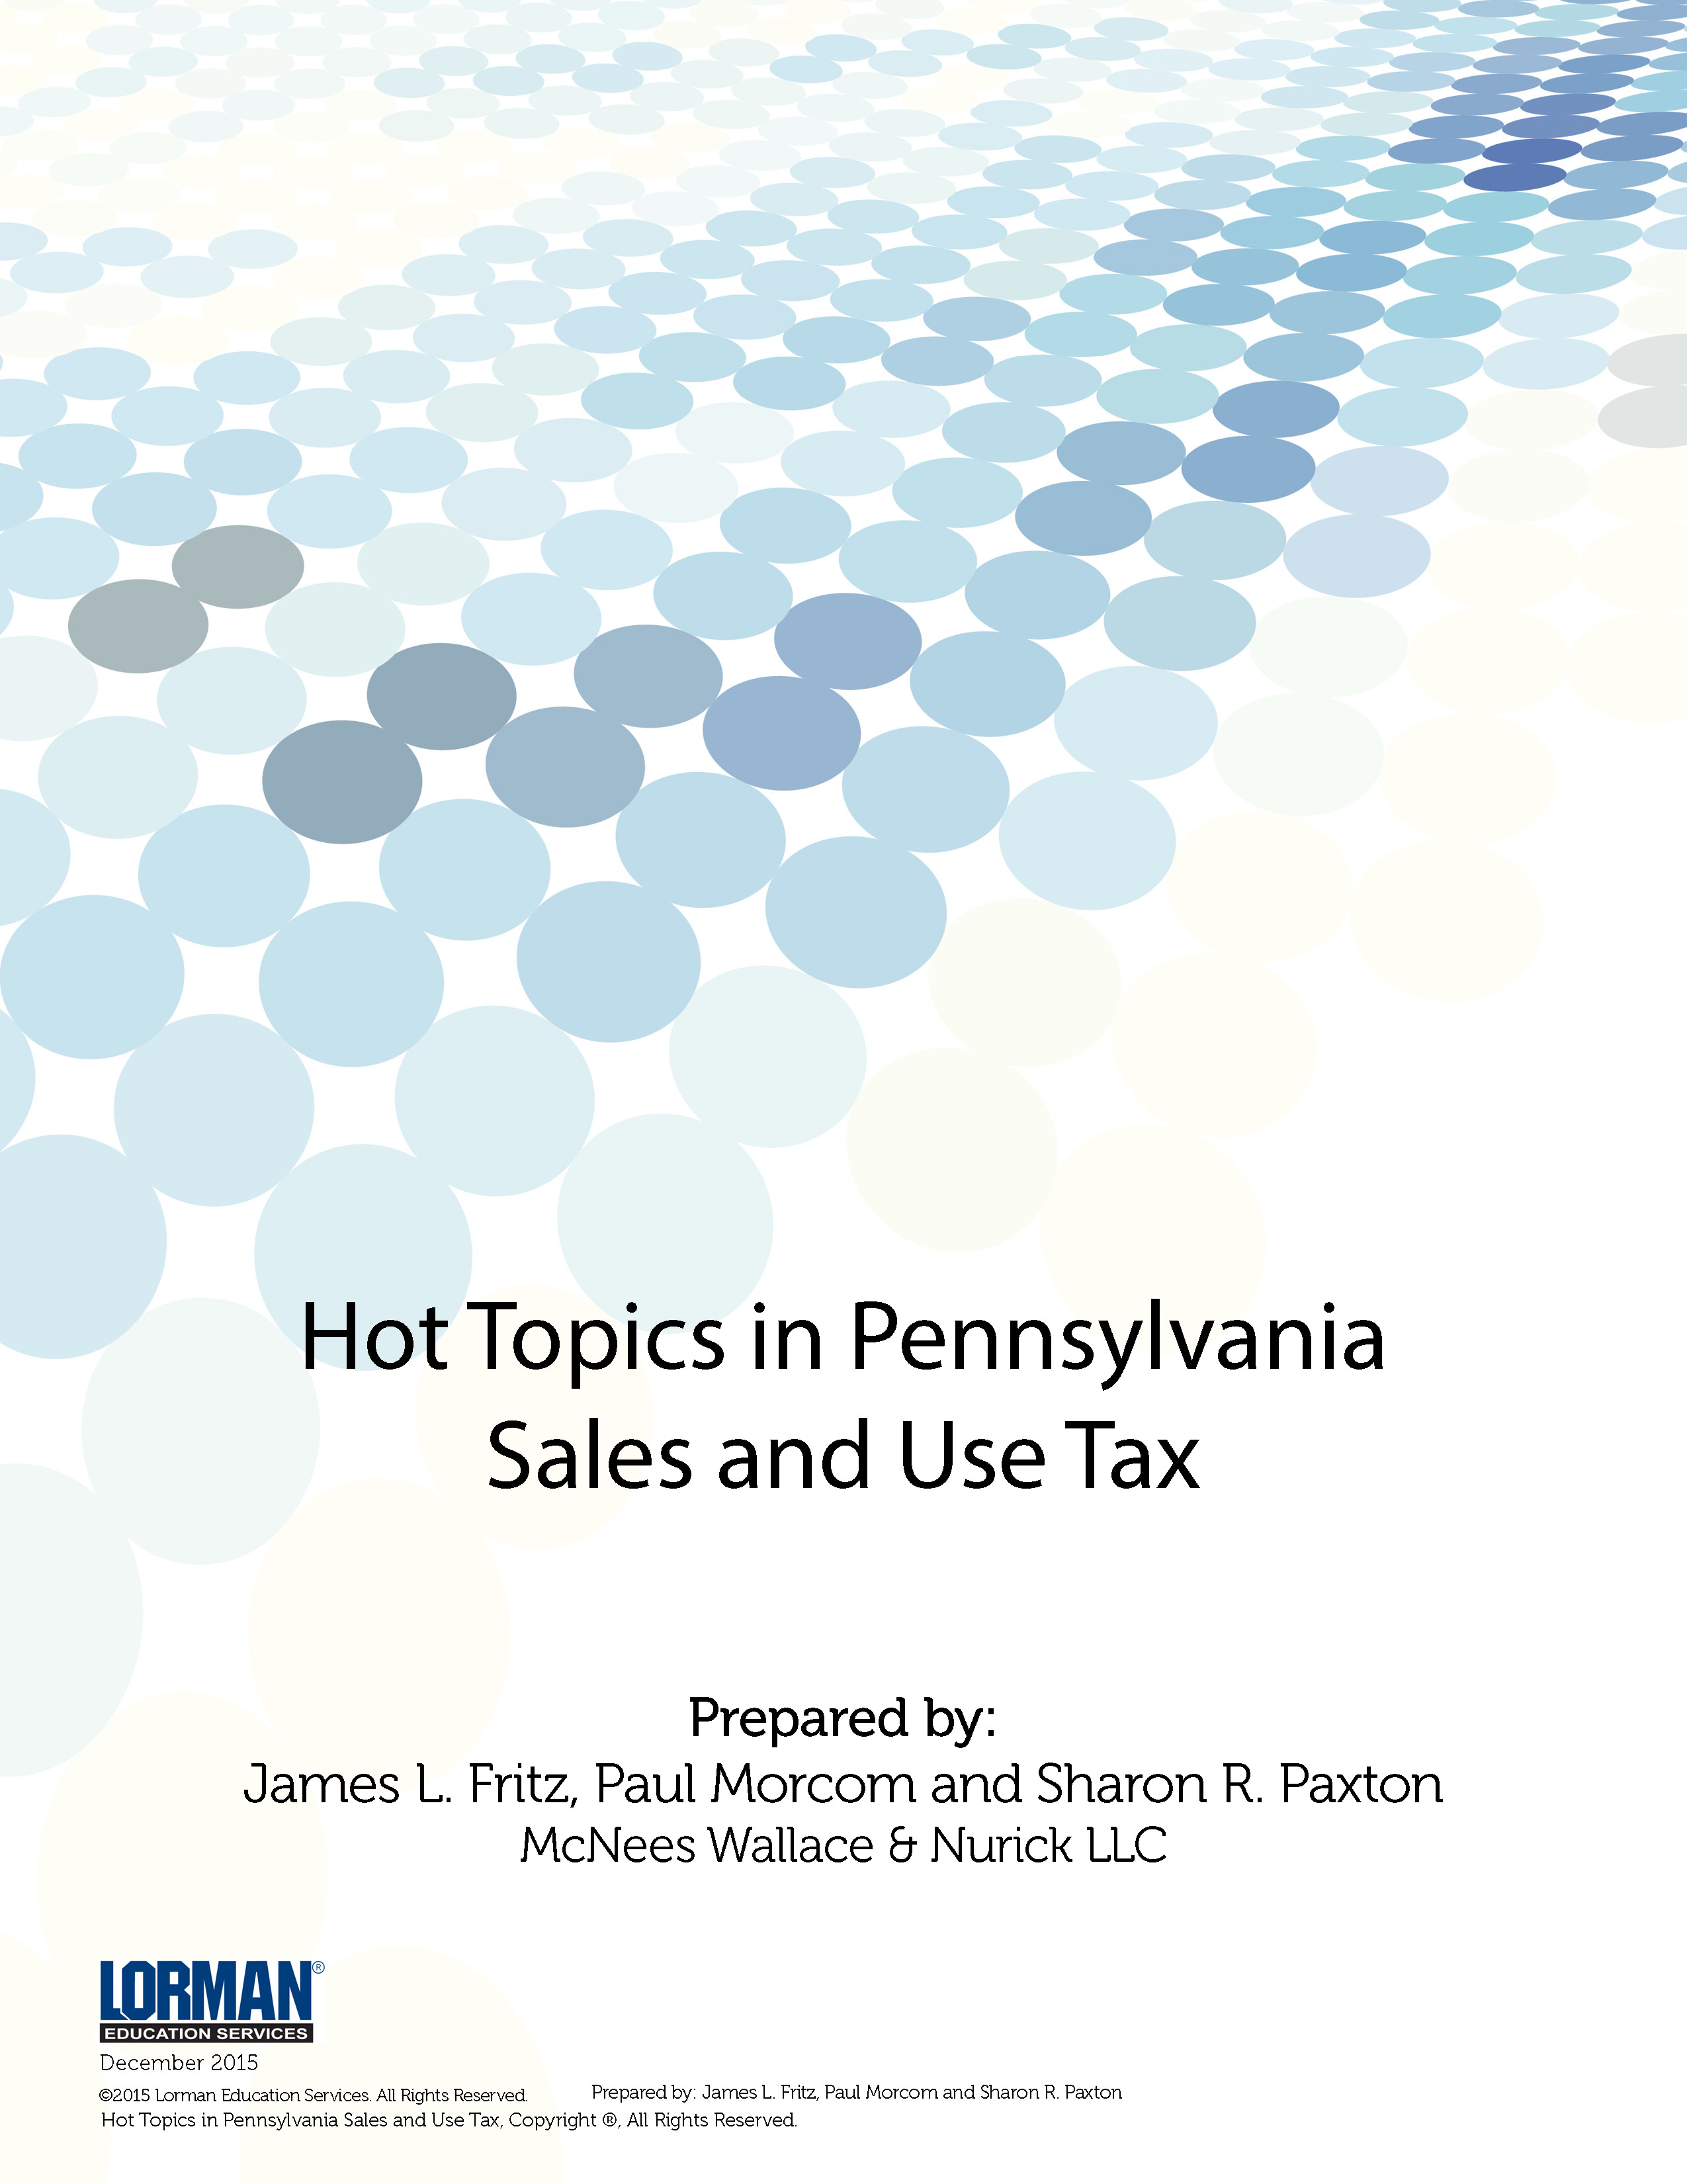 Hot Topics in Pennsylvania Sales and Use Tax